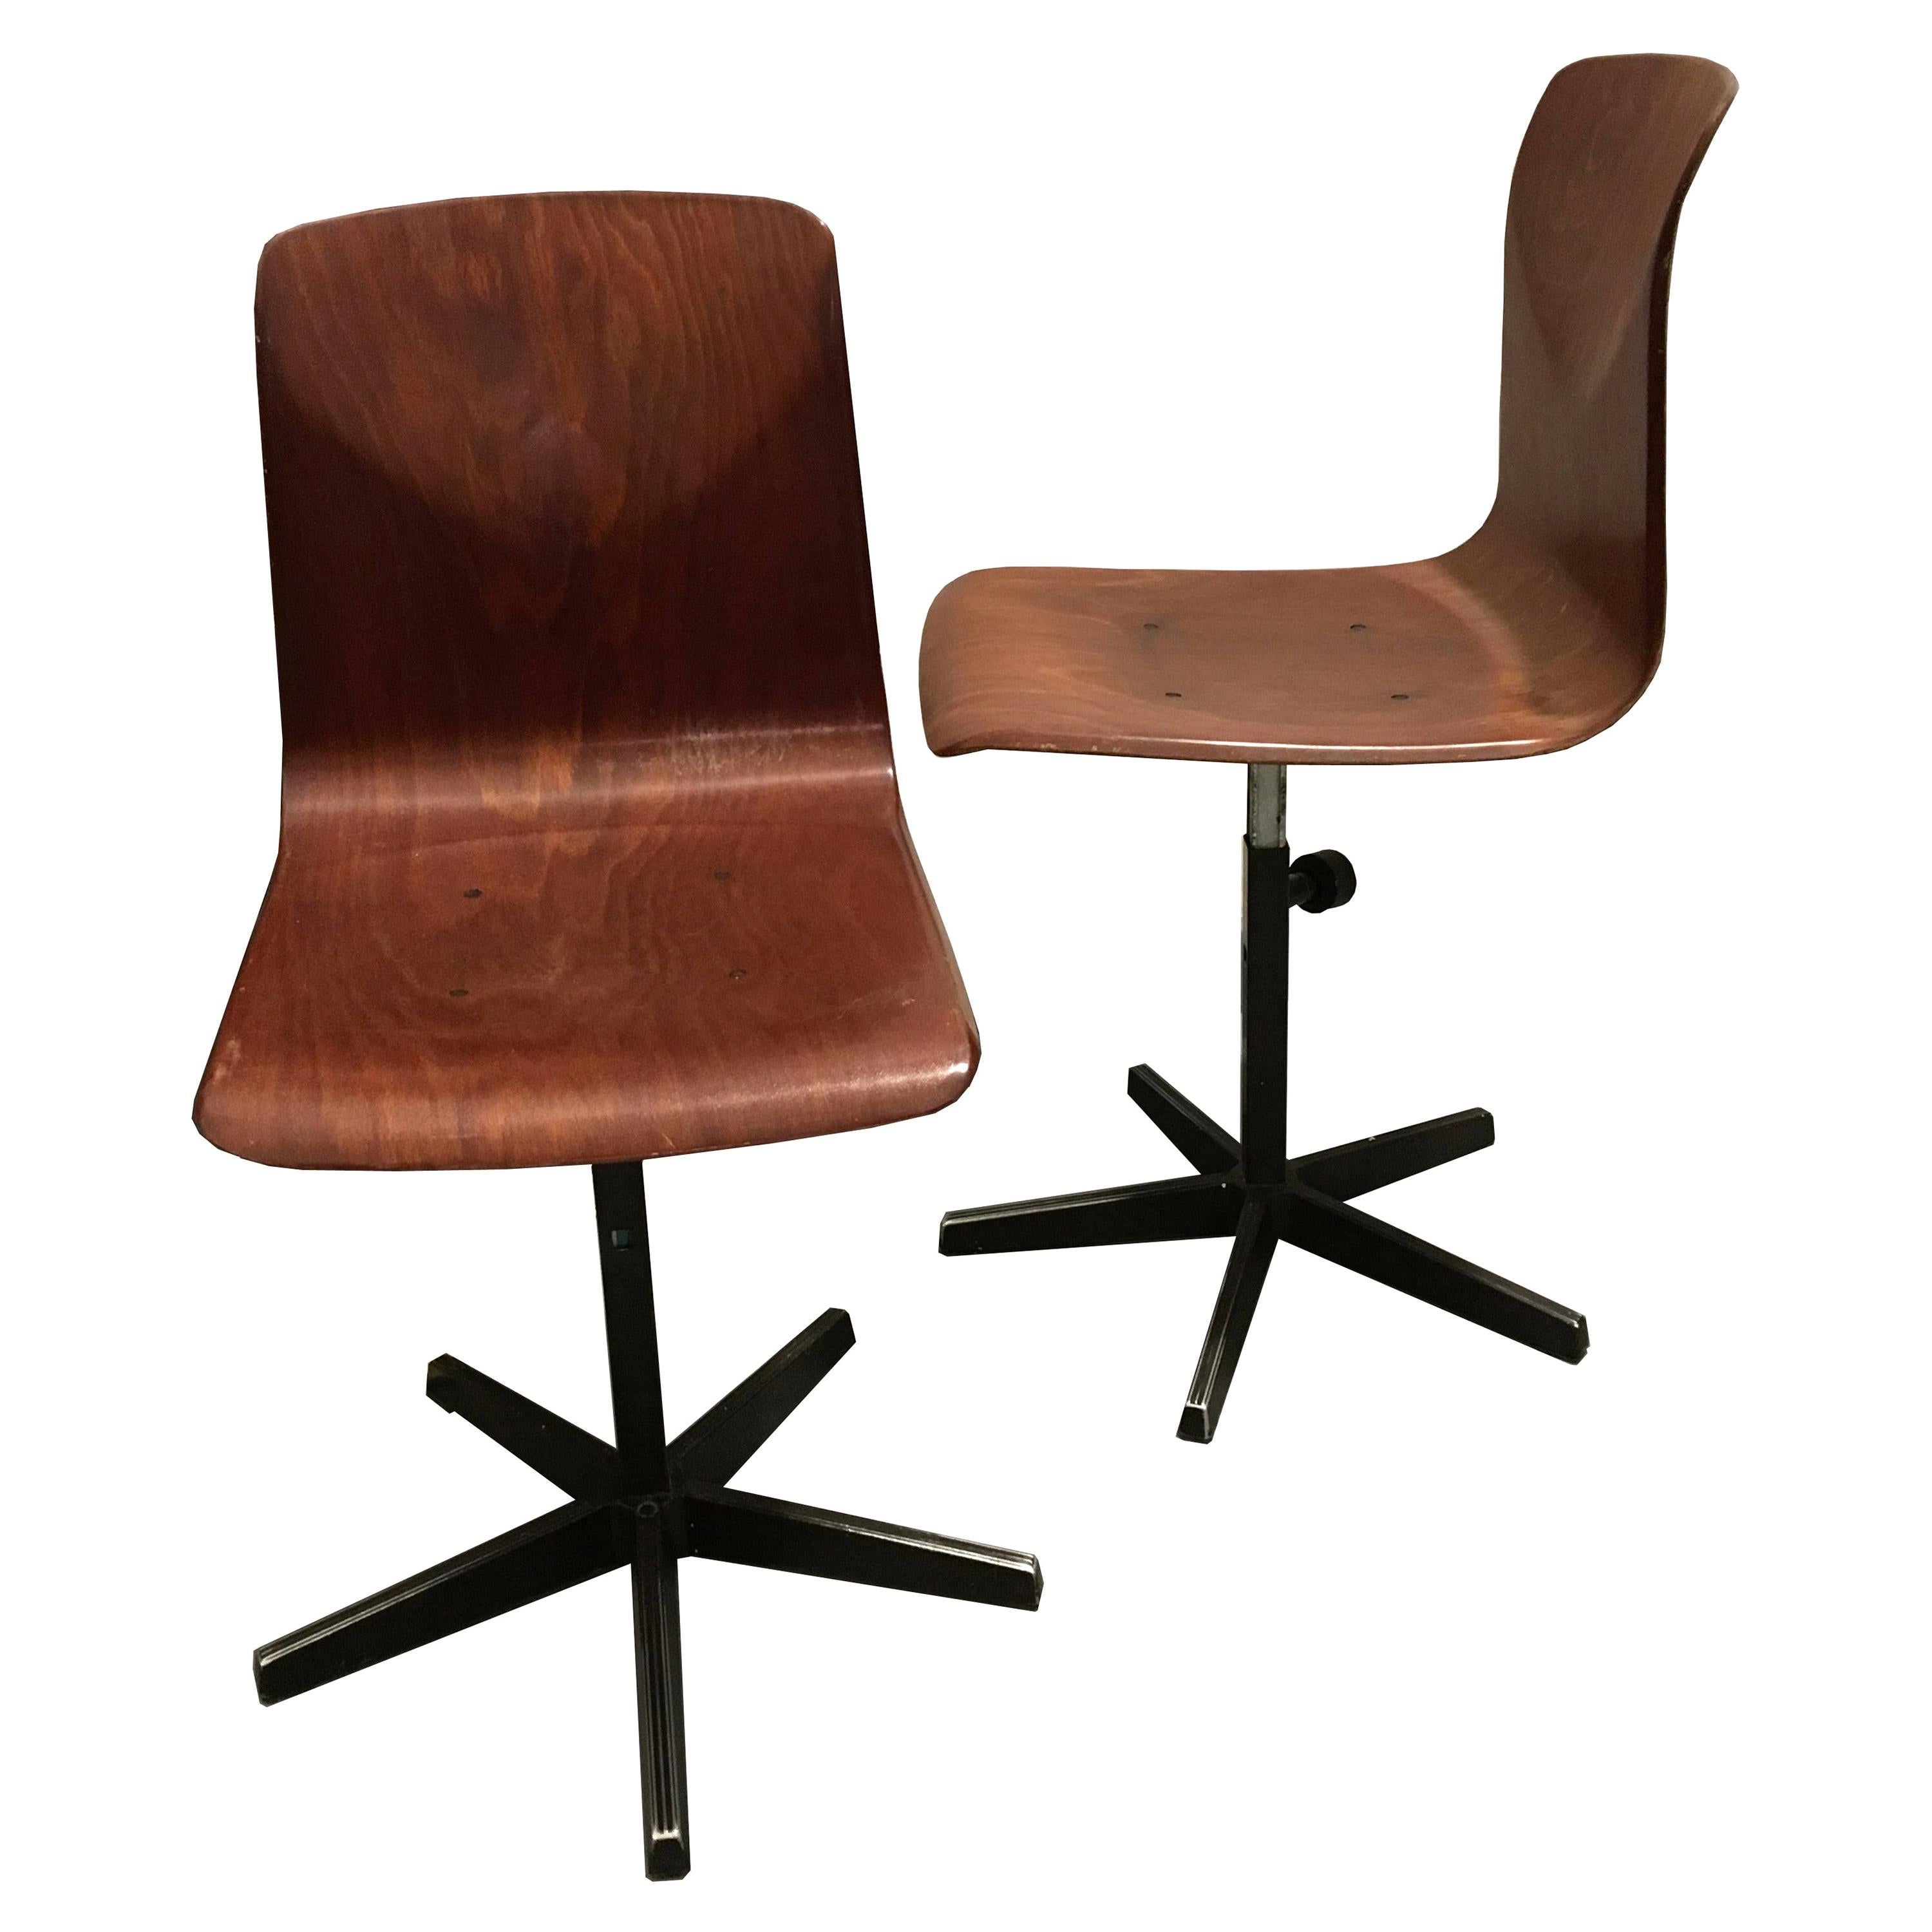 Pagholz Pair of Metal and Bent Plywood German Industrial Chairs, 1970s